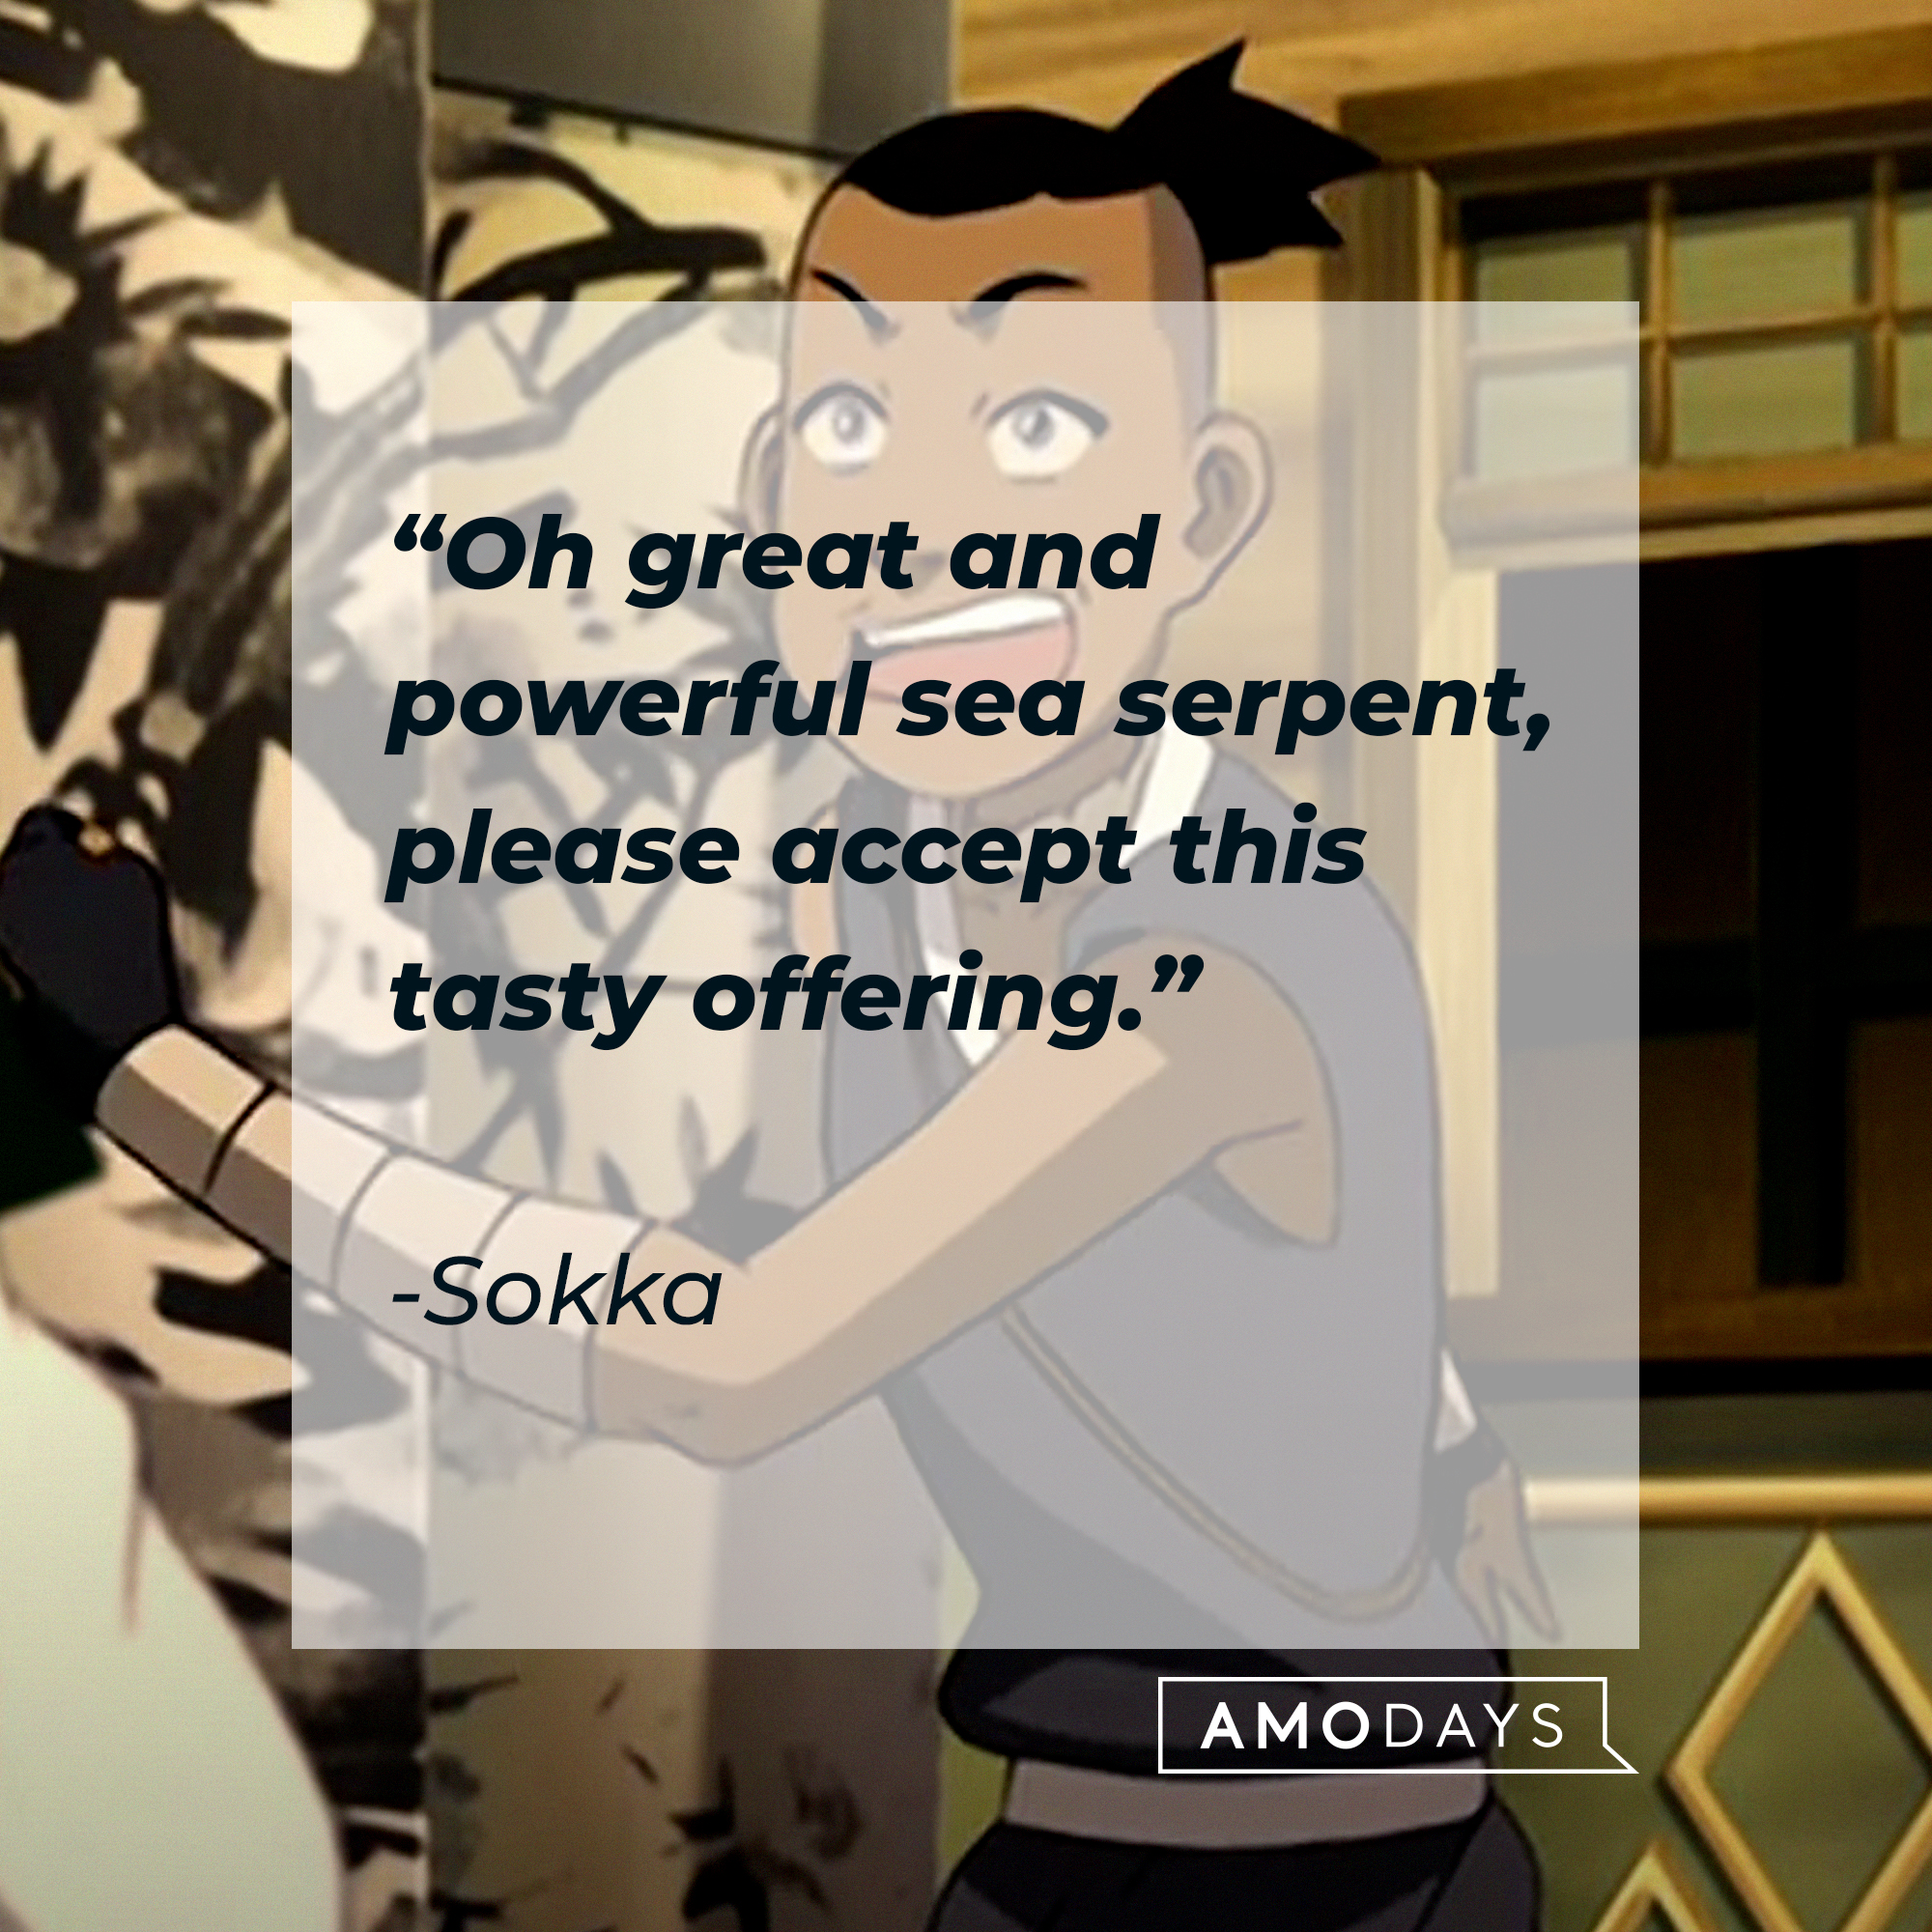 Sokka, with his quote: “Oh great and powerful sea serpent, please accept this tasty offering.” | Source: Youtube.com/TeamAvatar